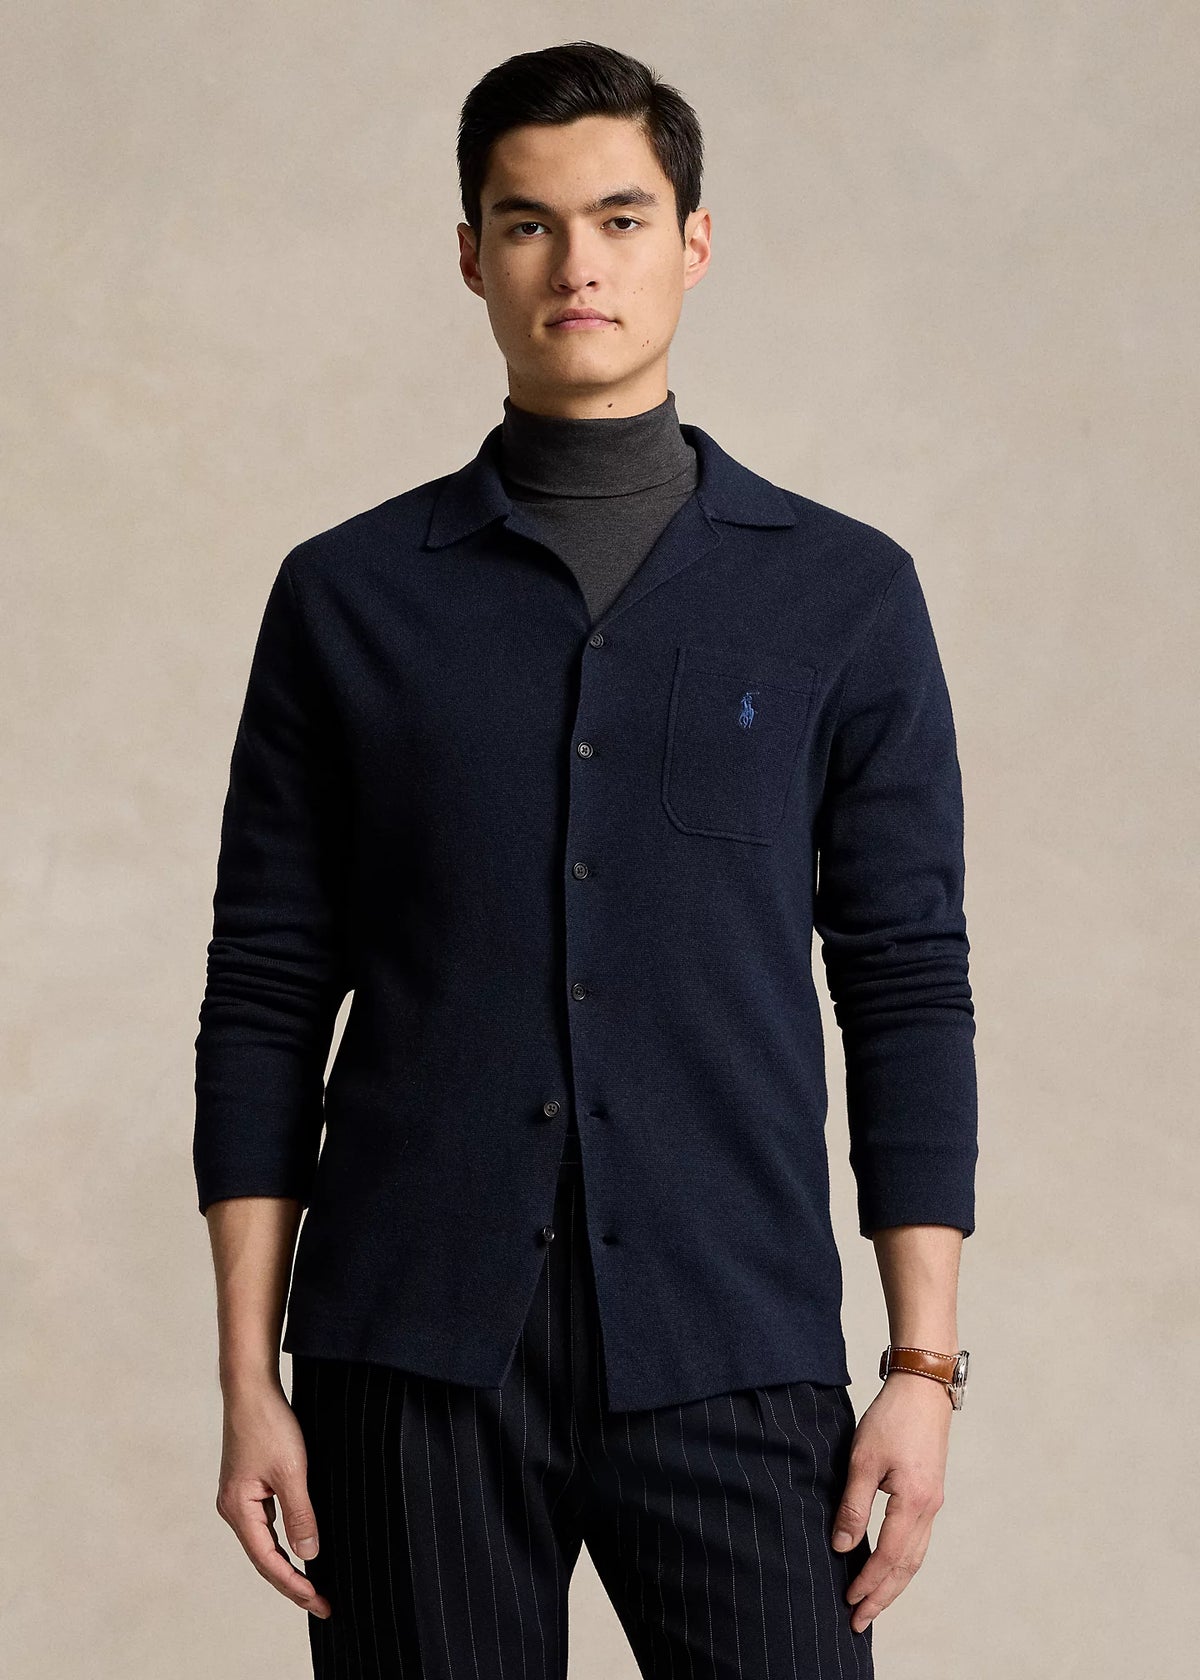 Collared Full Button Cardigan - Navy